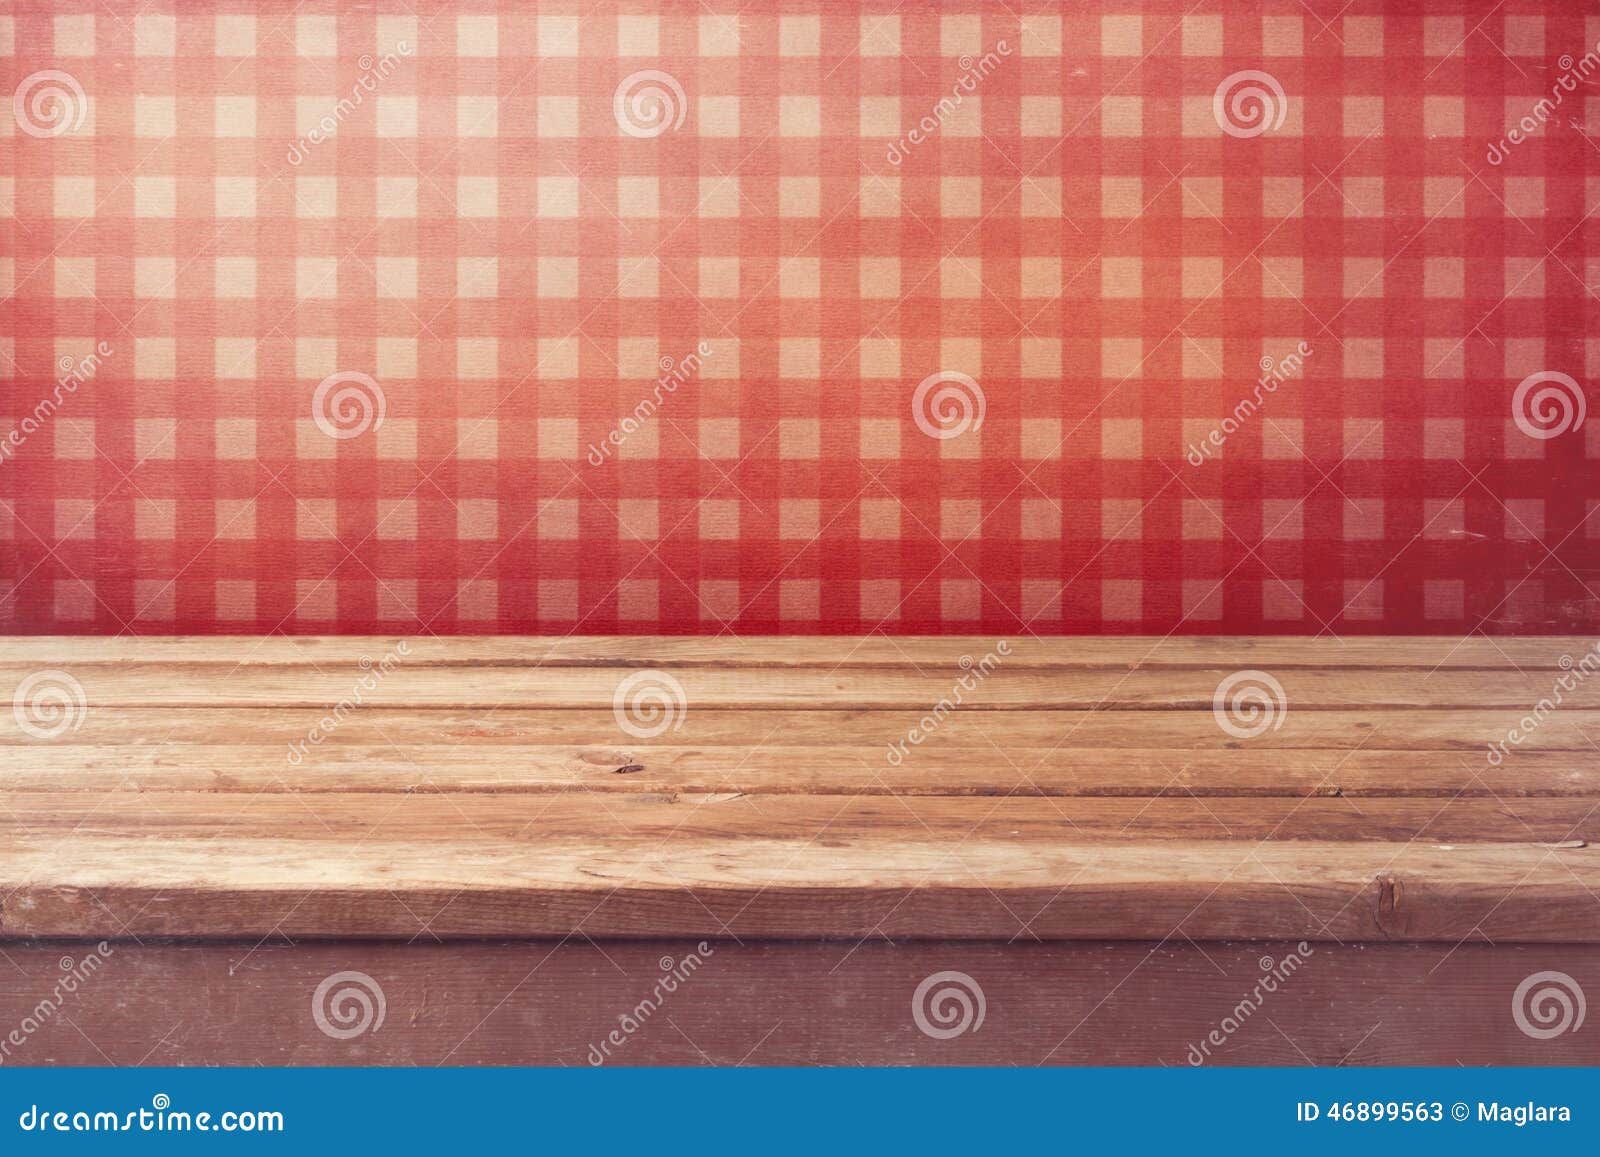 empty wooden deck table over checked red wallpaper. vintage kitchen interior.